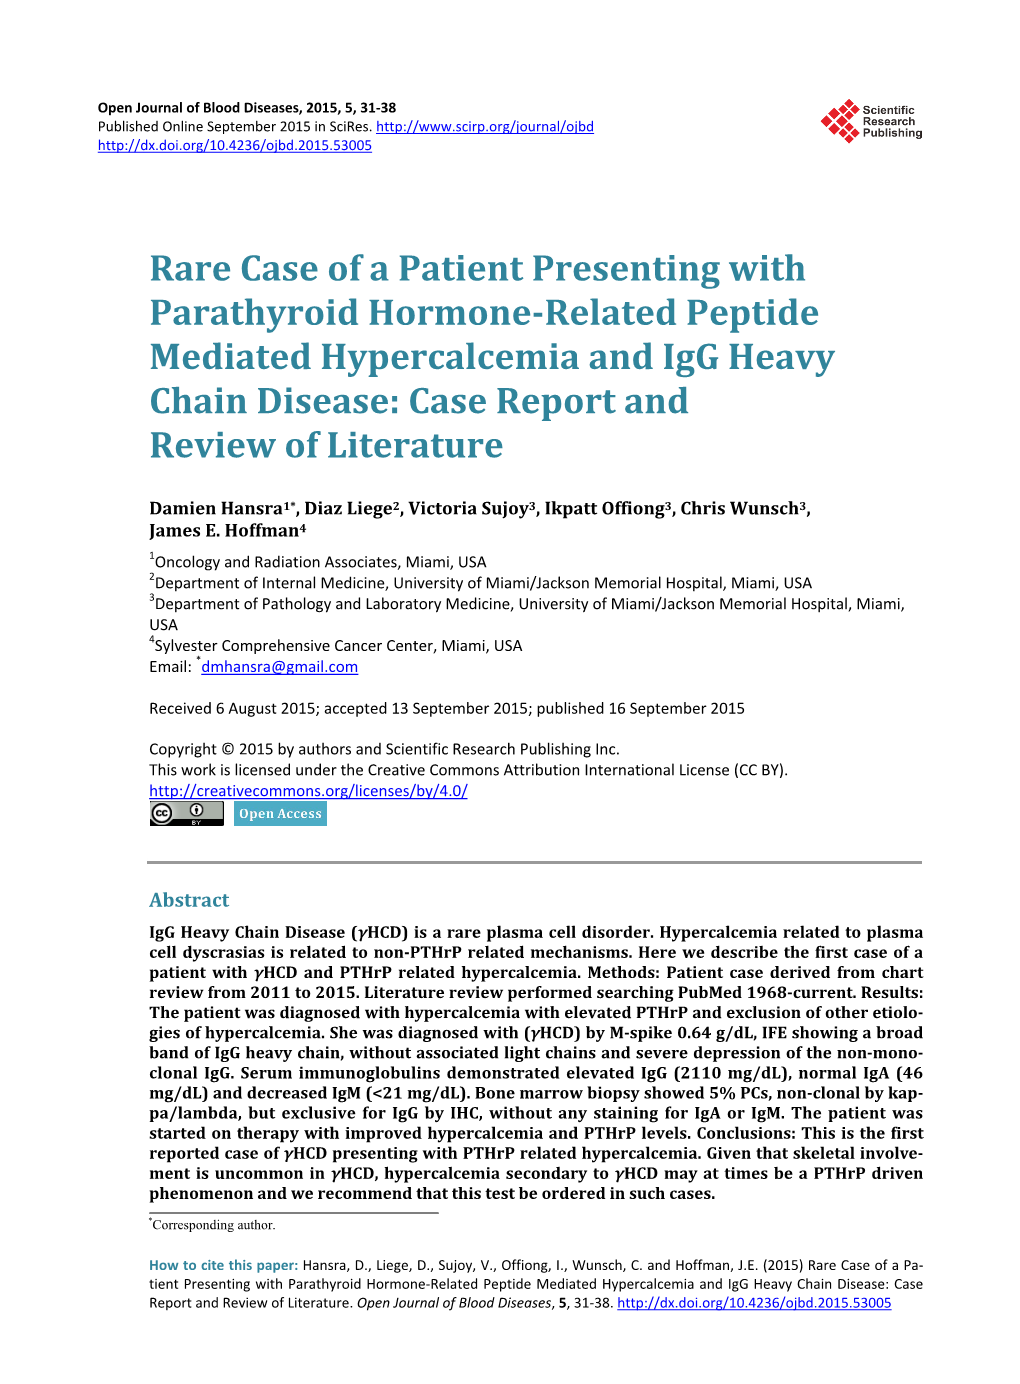 Rare Case of a Patient Presenting with Parathyroid Hormone-Related Peptide Mediated Hypercalcemia and Igg Heavy Chain Disease: Case Report and Review of Literature